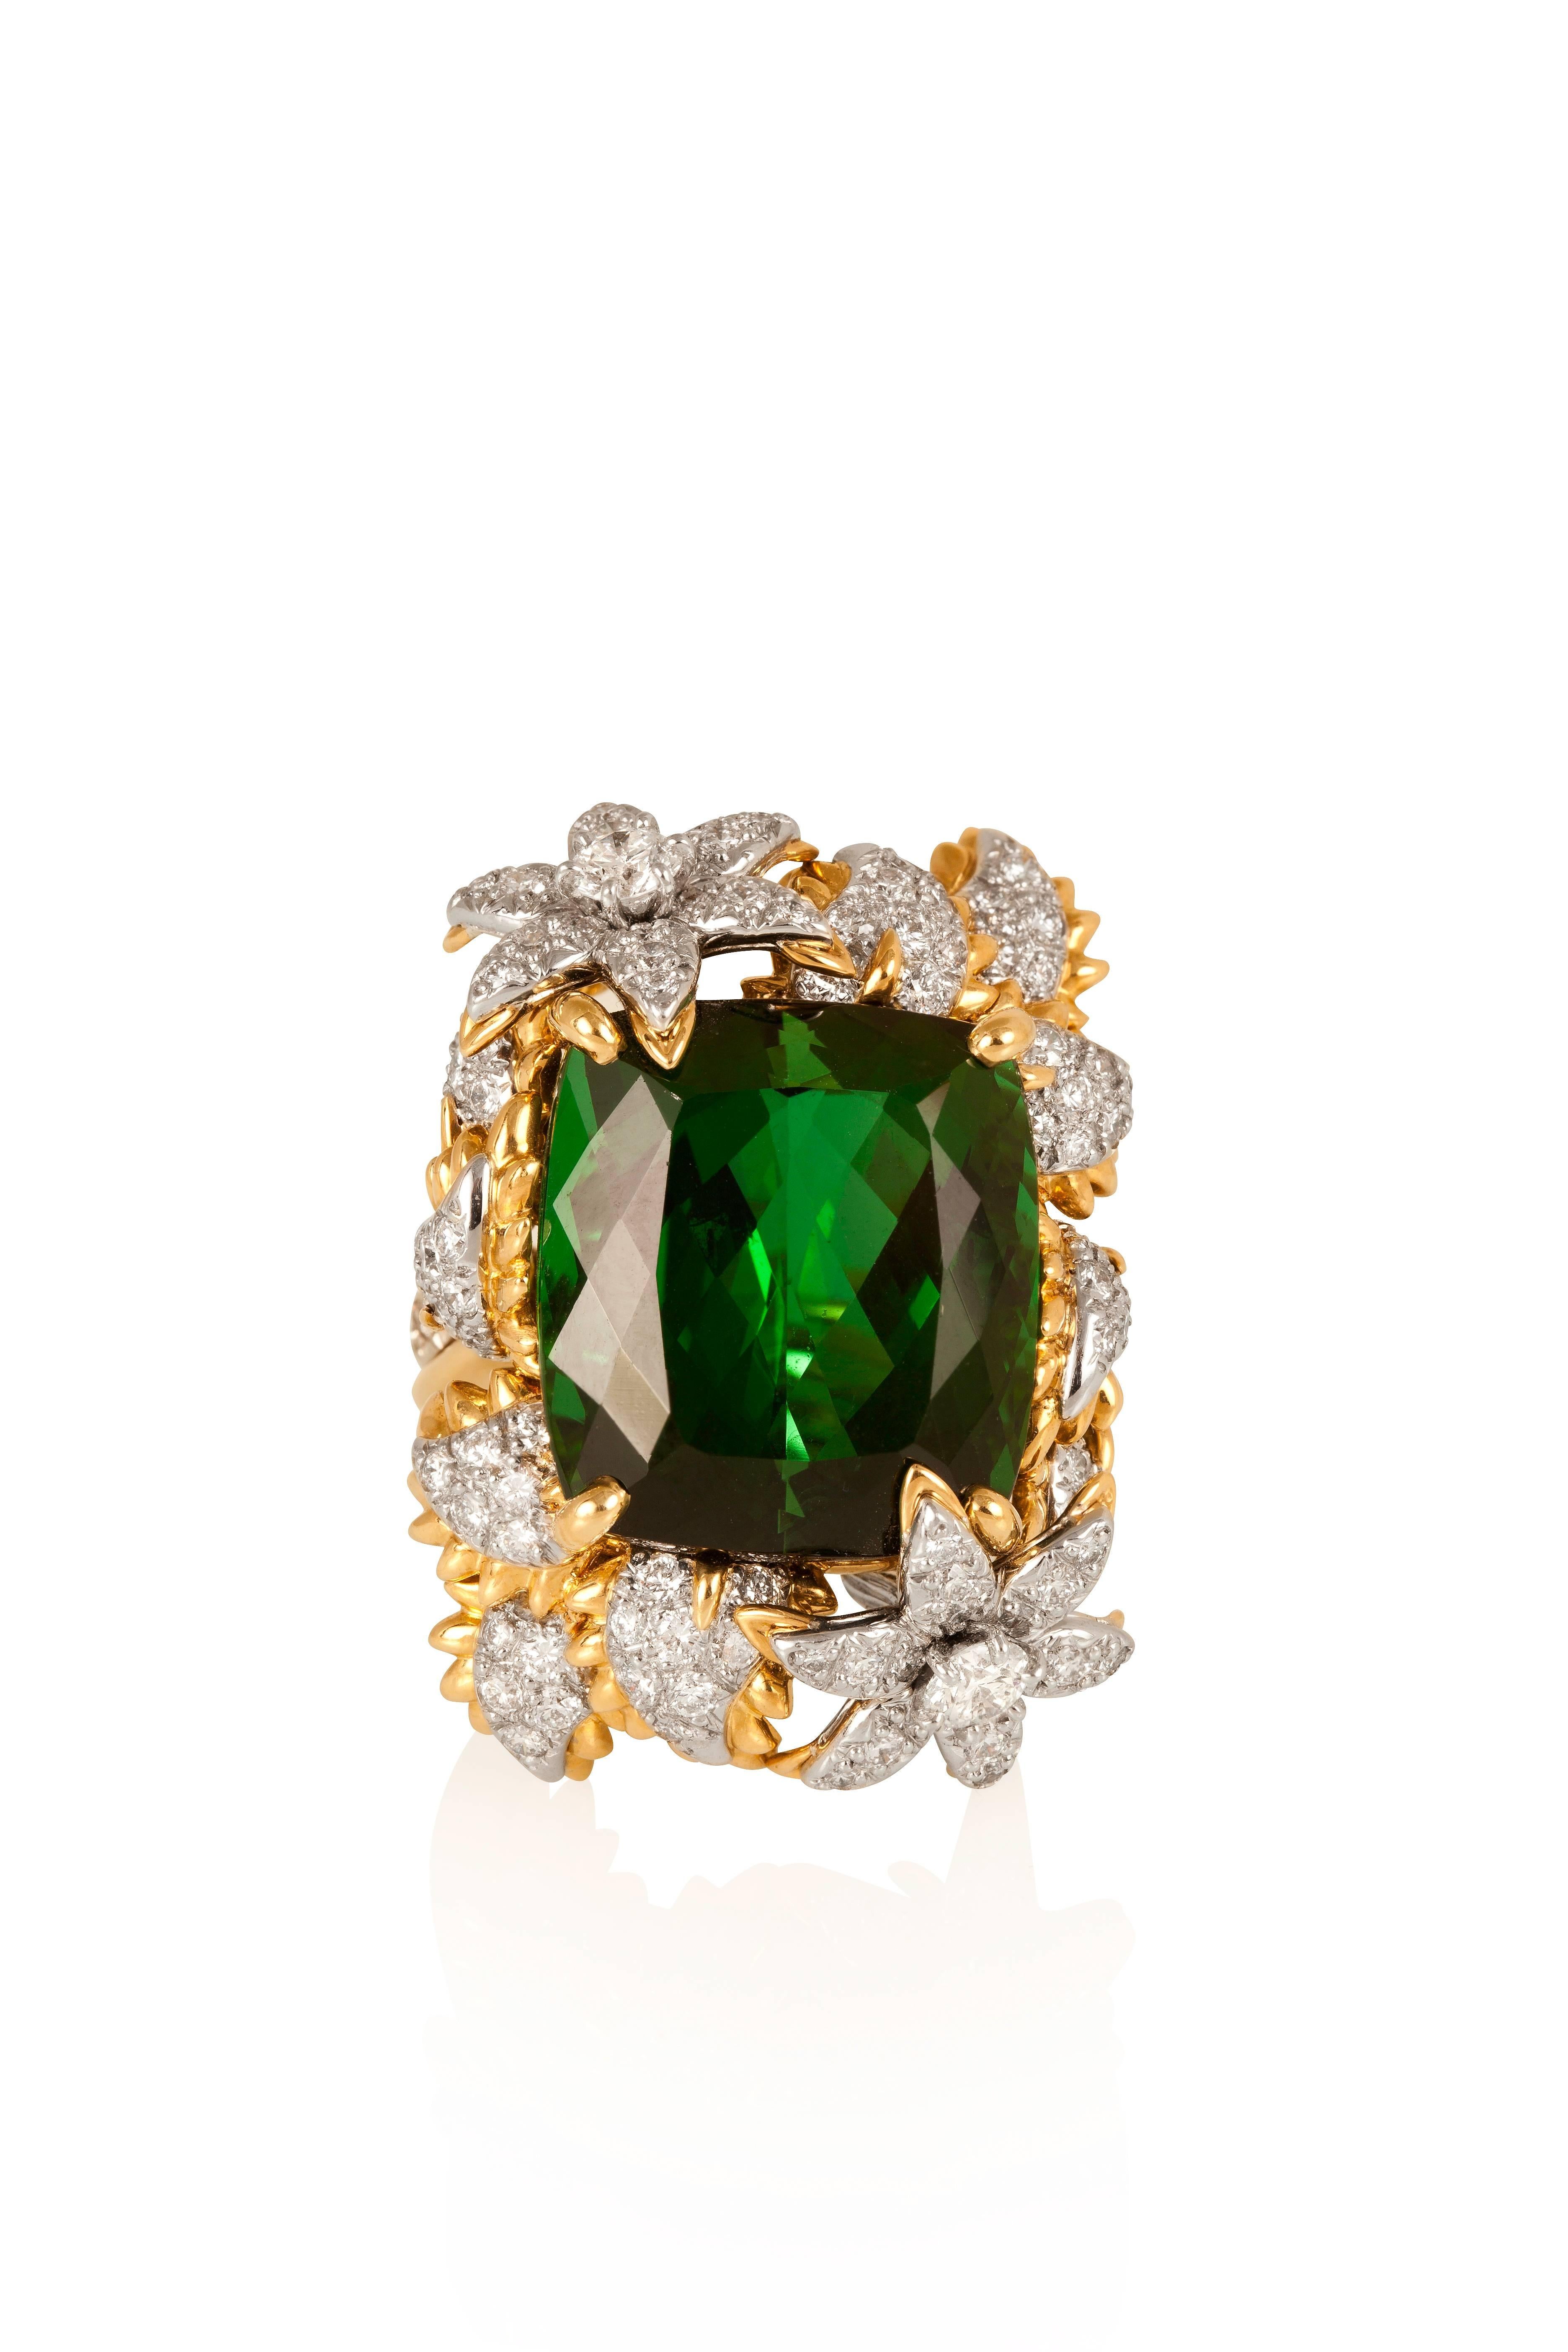 Centered on an exceptional cushion green tourmaline weighing approximately 30 carats, this exuberant ring is decorated with diamond- encrusted flowers and petals, mounted in 18-karat yellow gold and platinum.
Ring size: US 7.5

CREDENTIALS
•